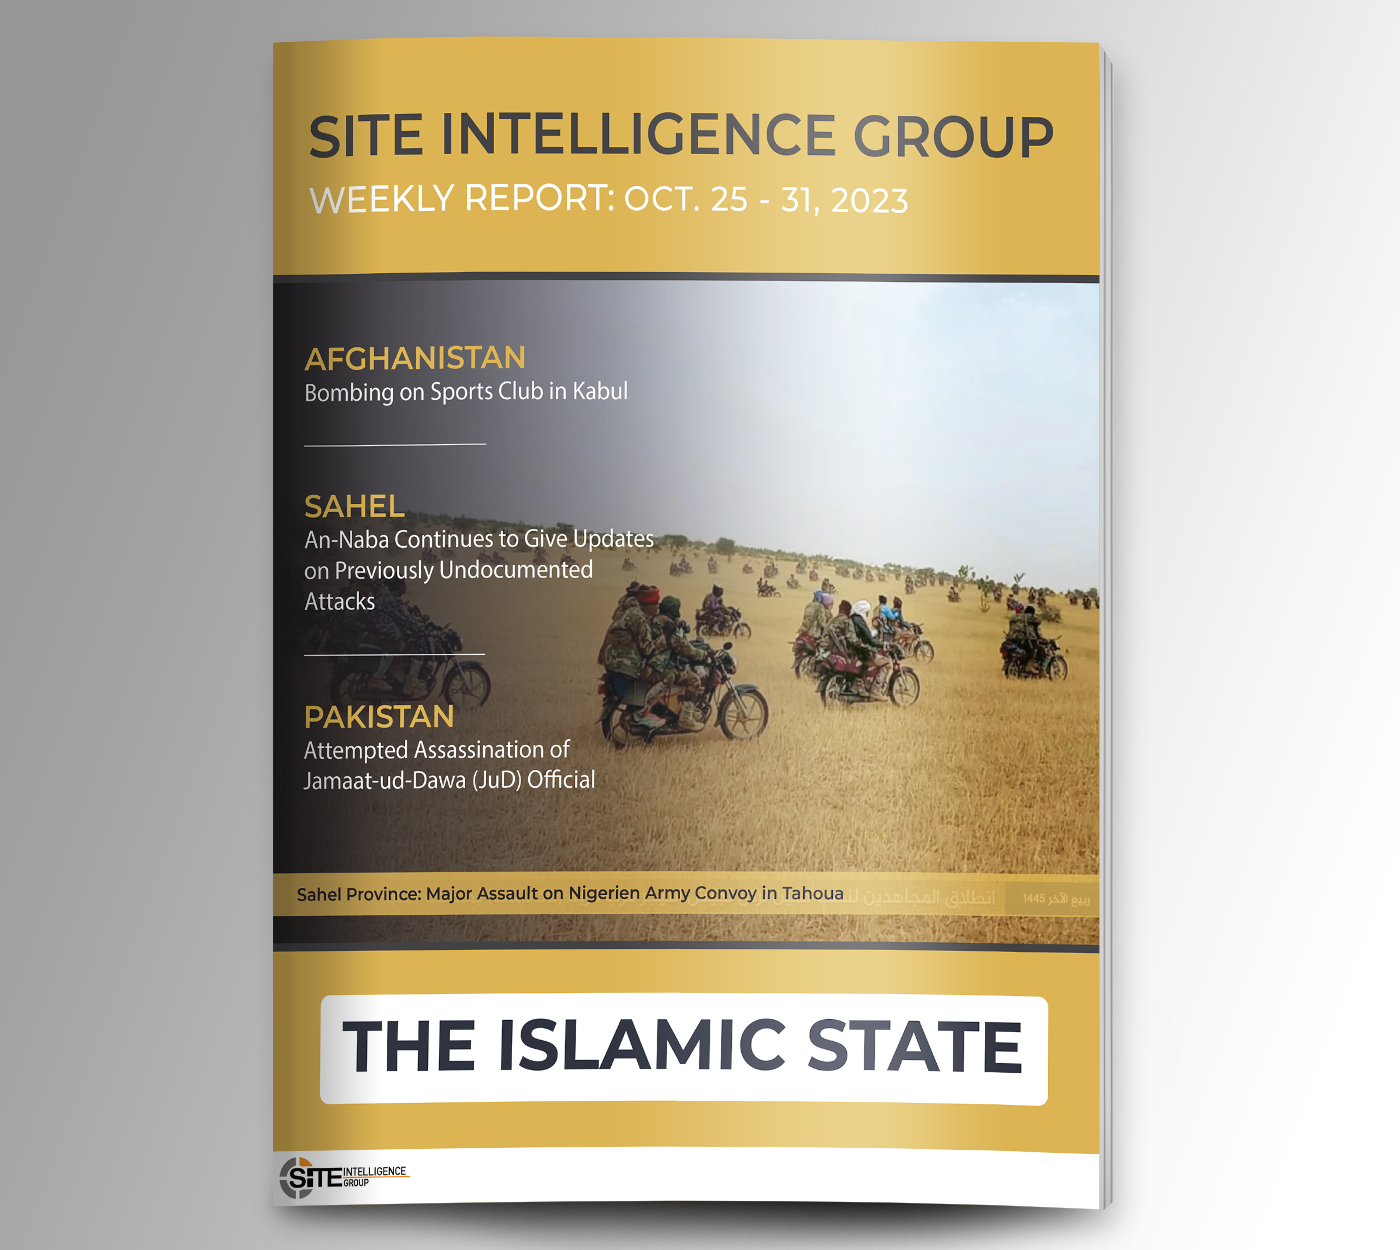 Weekly inSITE on the Islamic State for October 25-31, 2023